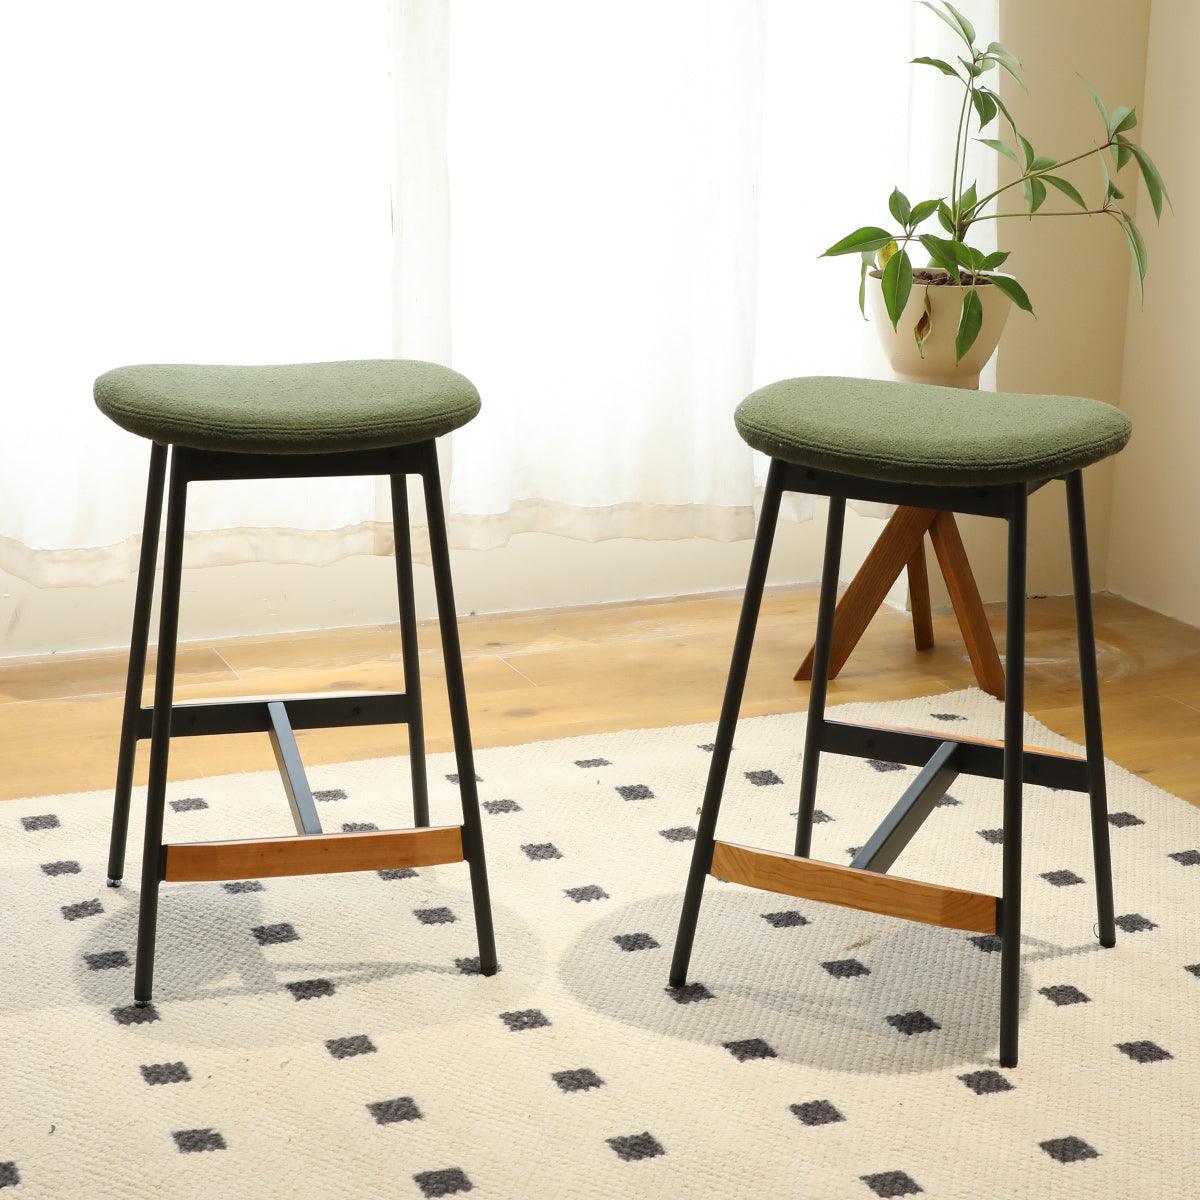 🆓🚛 Modern Set Of 2 29" Bar Stools Comfortable & Stylish Counter Height & Bar Height Bar Stools, Soft Fabric Upholstered, Backless for Kitchen, Dining Room Bar Chairs, Green